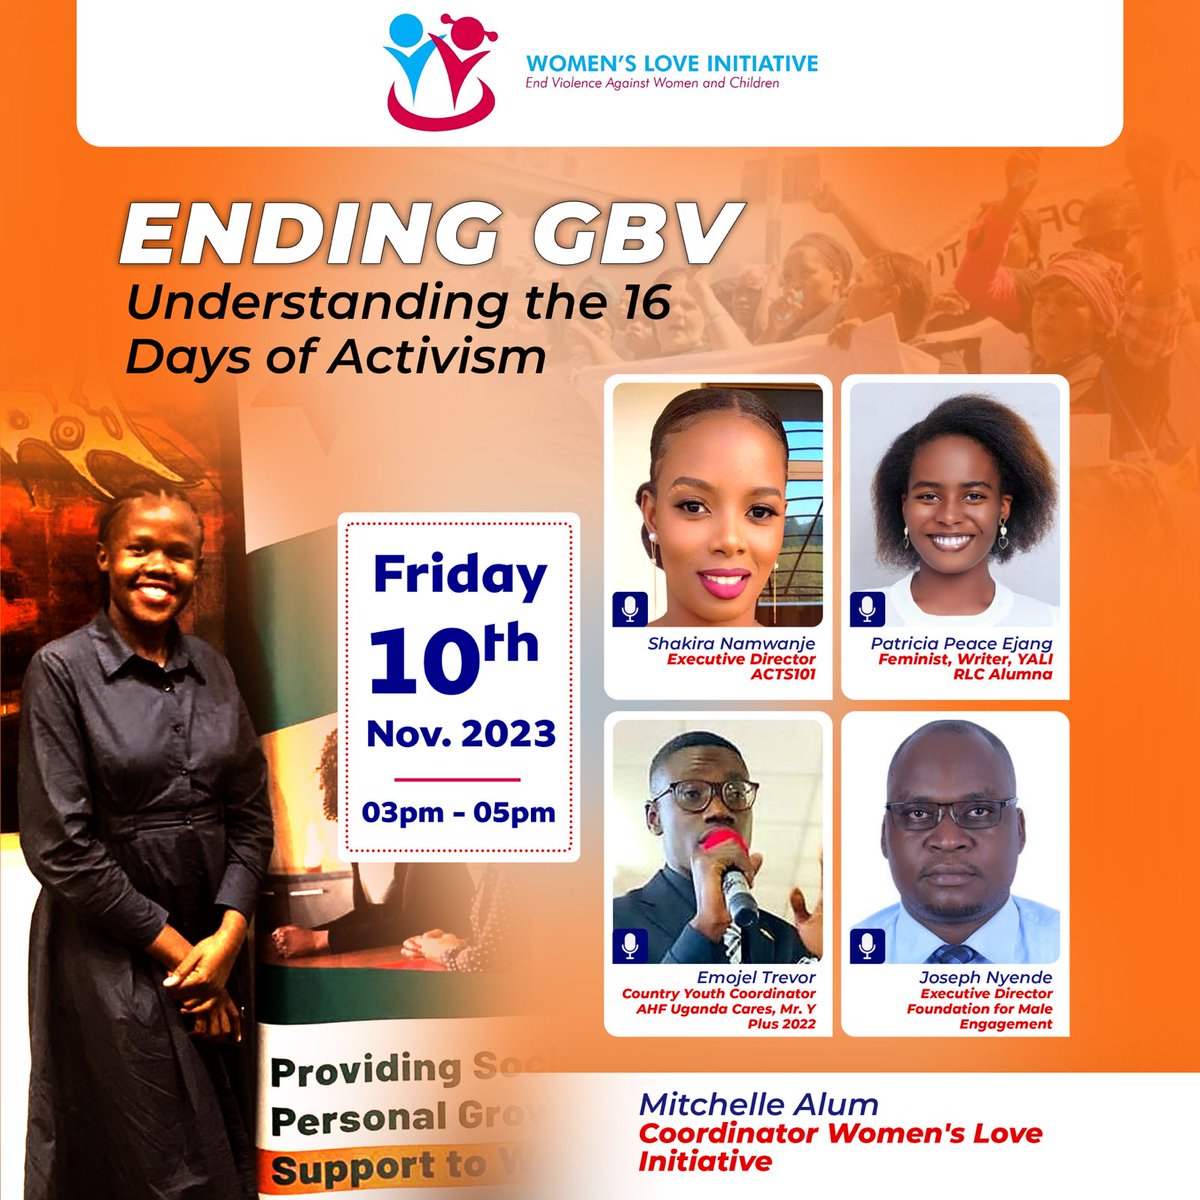 GBV is one of the most notable human rights violations in society. Join our X space this Friday at 3:00 p.m. about understanding the 16 days of activism. Tap the link below👇 x.com/i/spaces/1rmGP… @EmojelTrevor @josephnyende1 @Trishathepoet @KeiraShakie @ahfugandacares